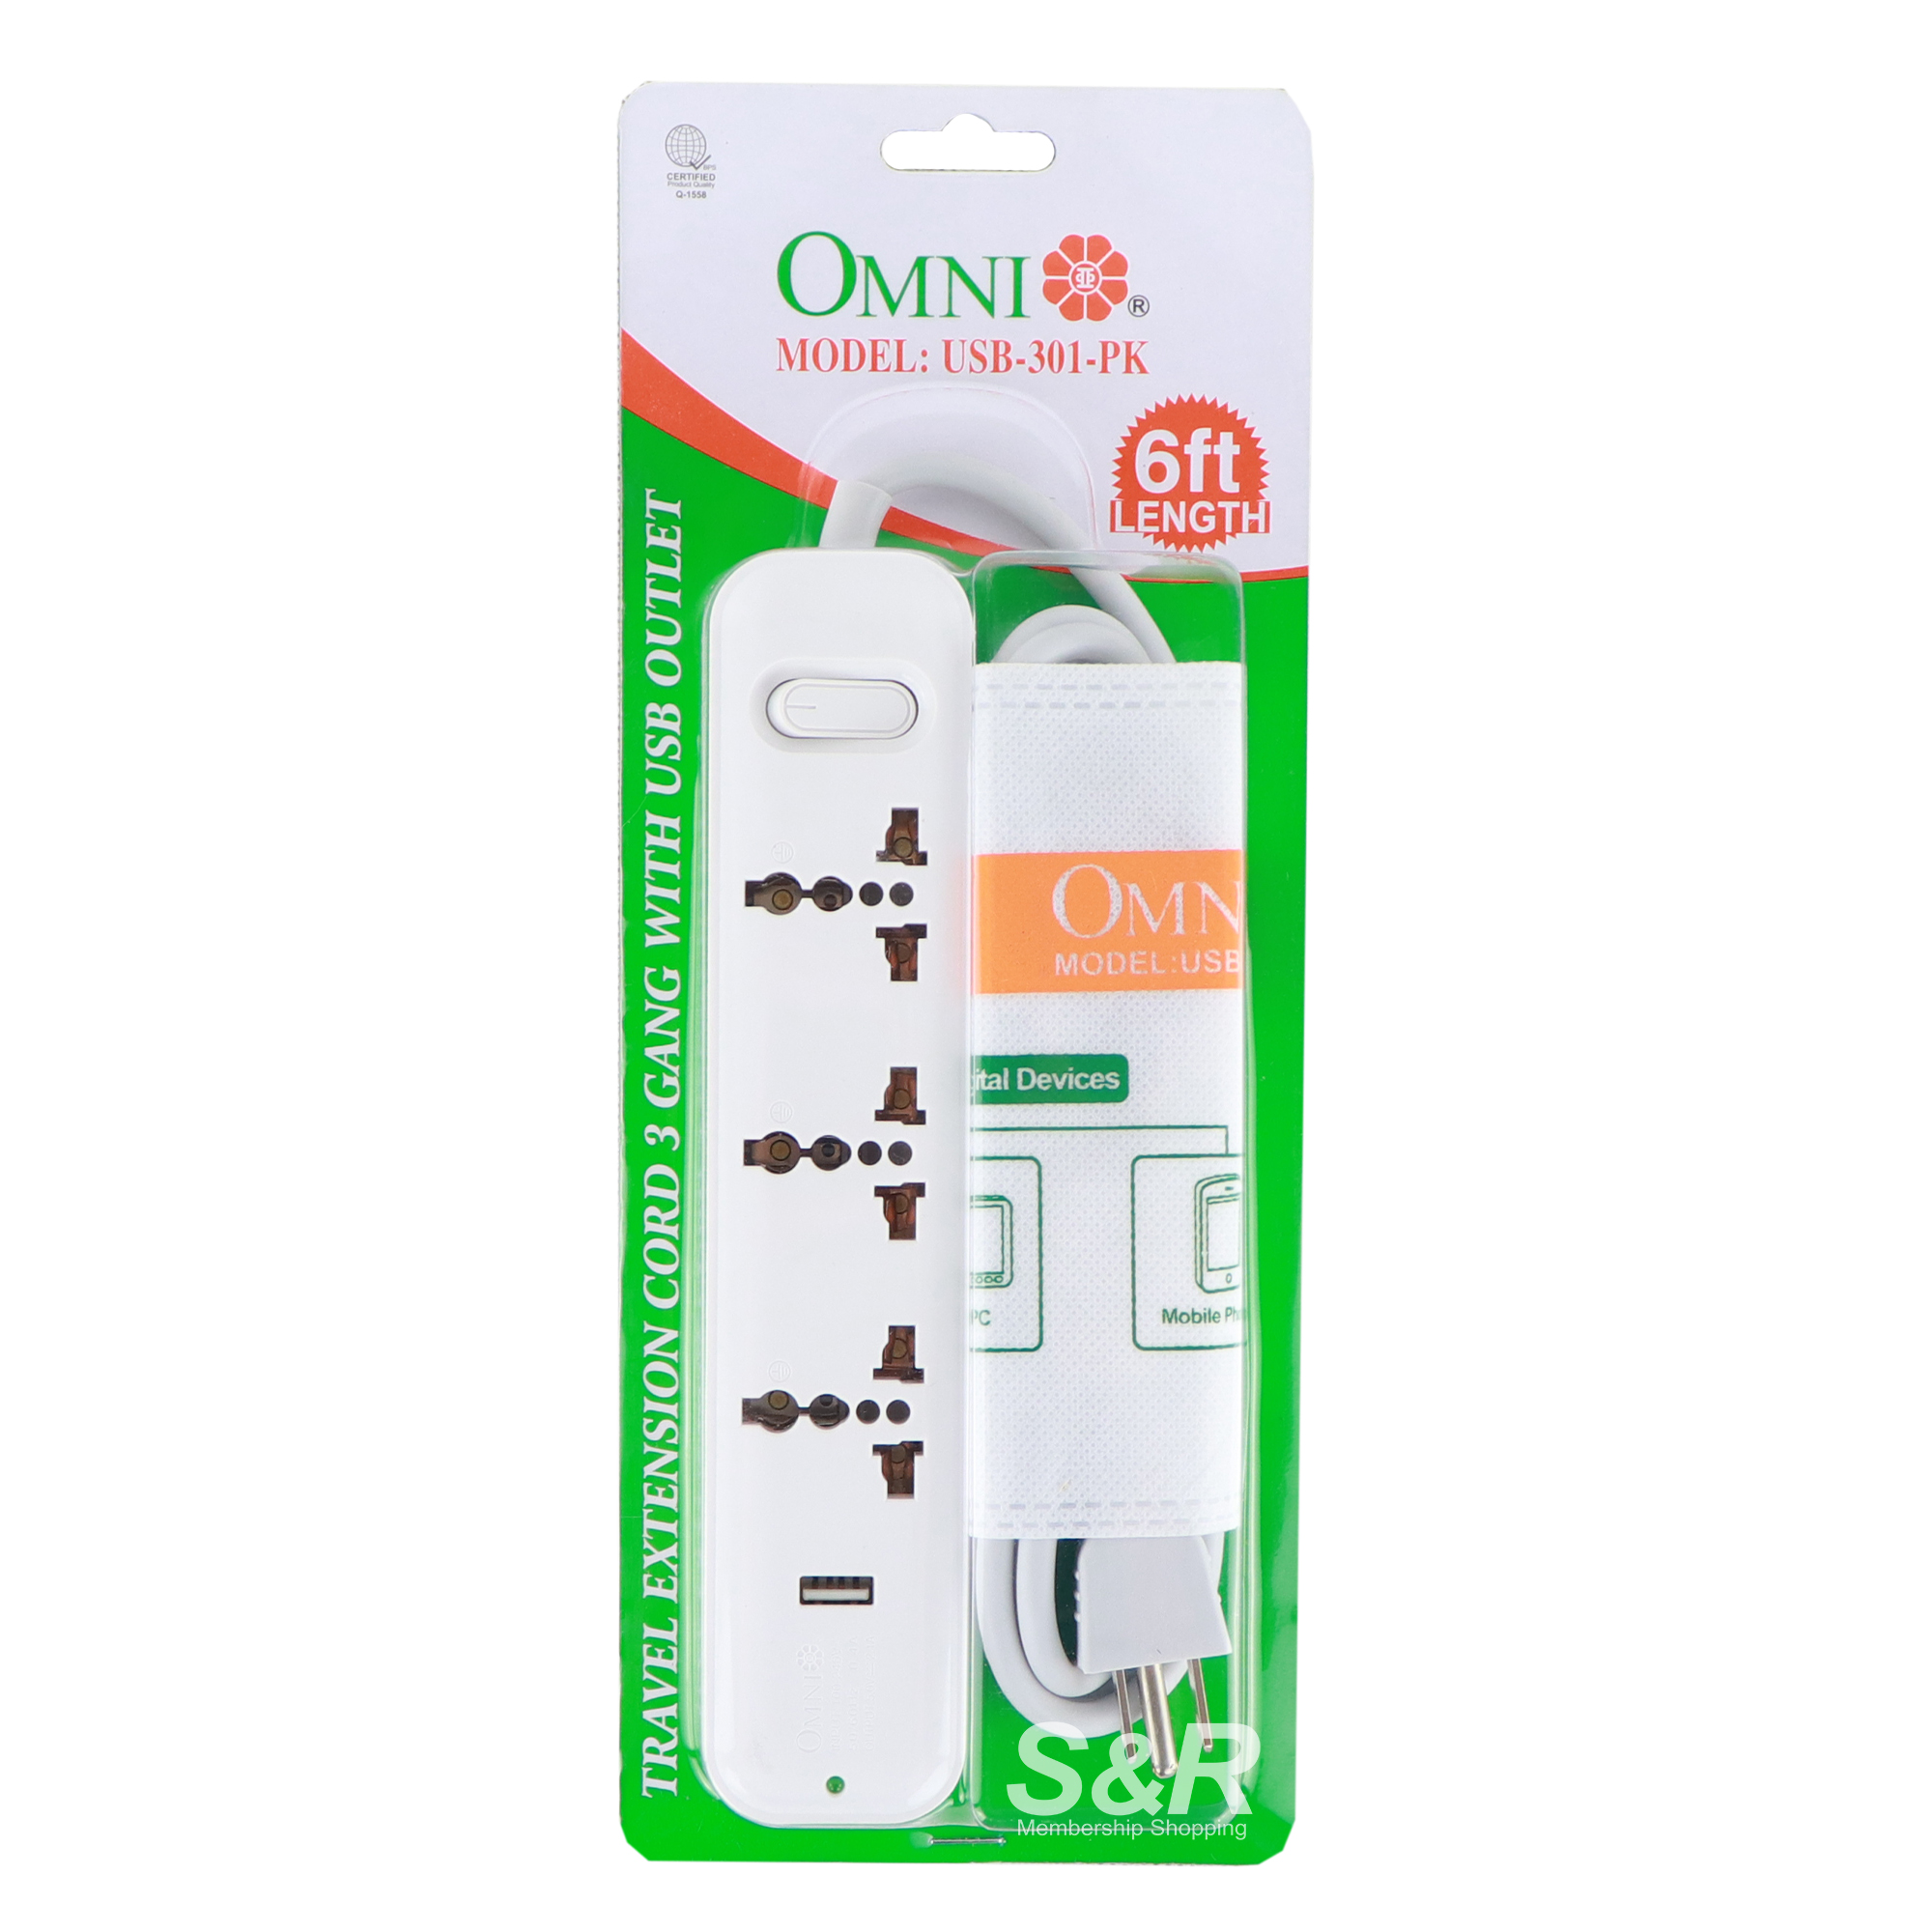 Omni 3-Gang and 1 USB Port Extension Cord with Switch USB-301-PK 1pc